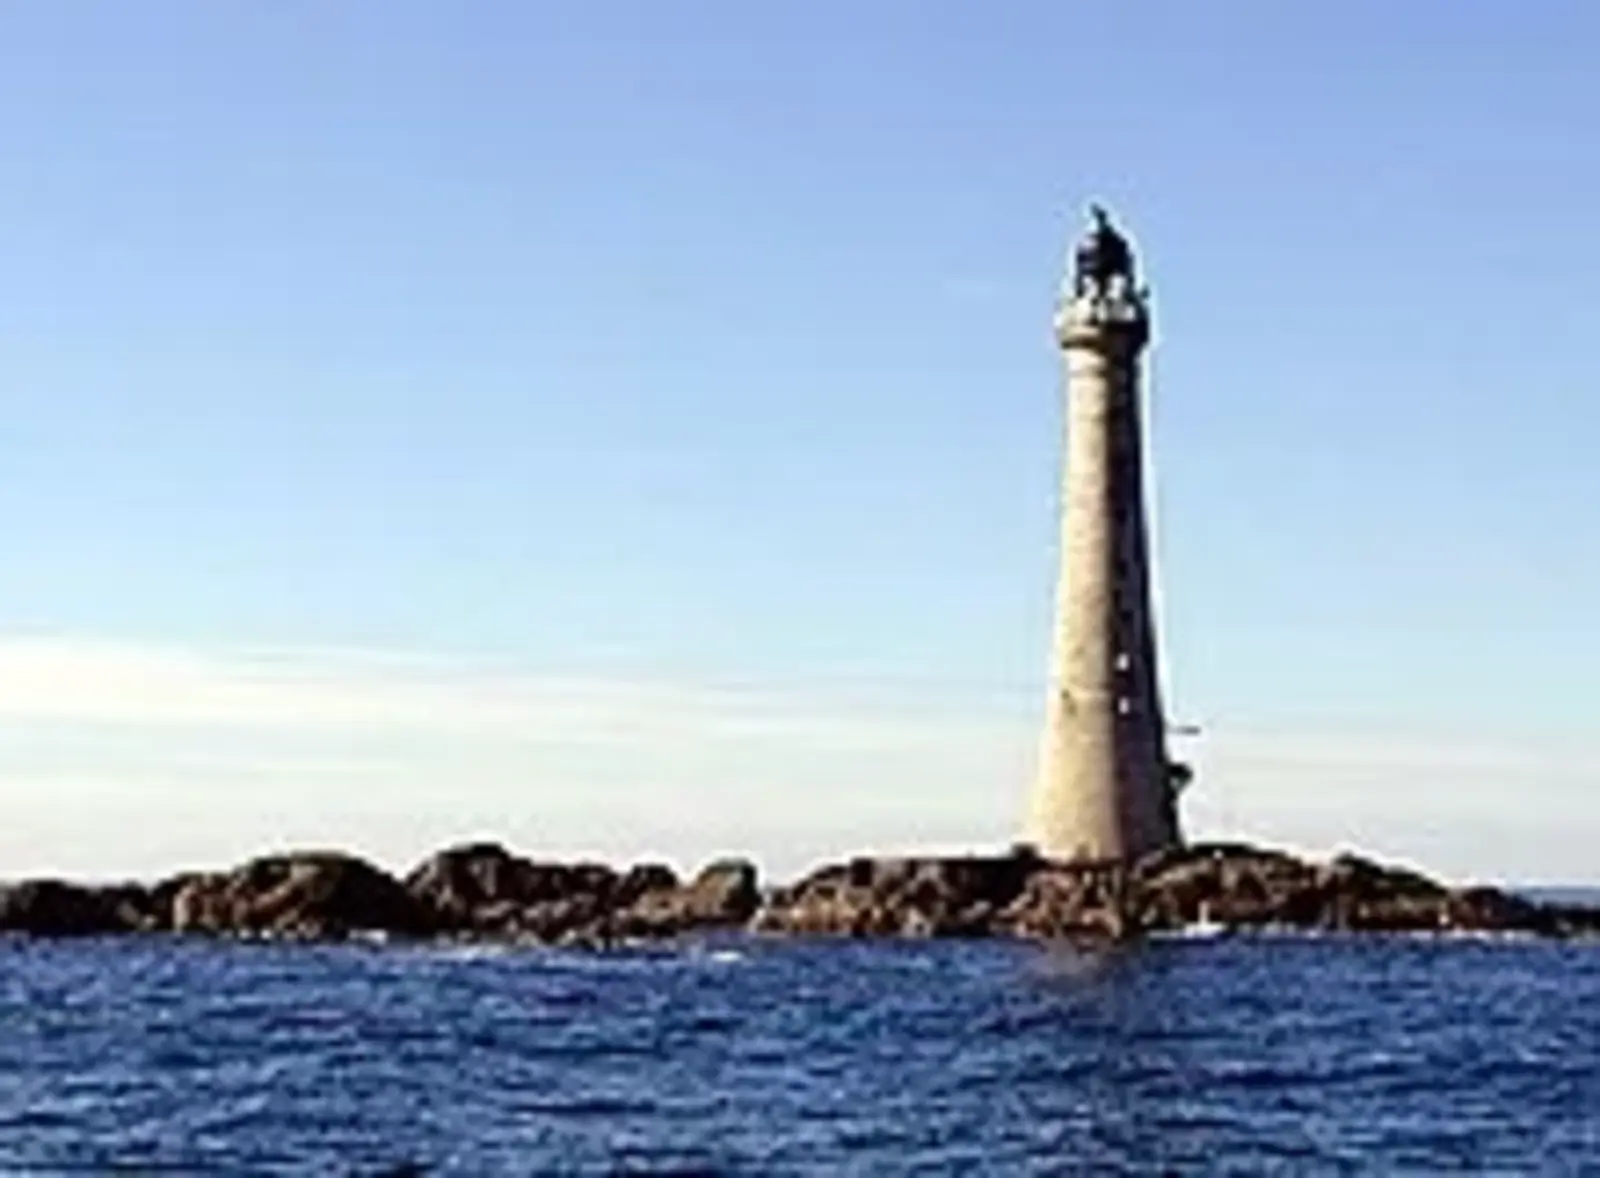 Skerryvore Lighthouse